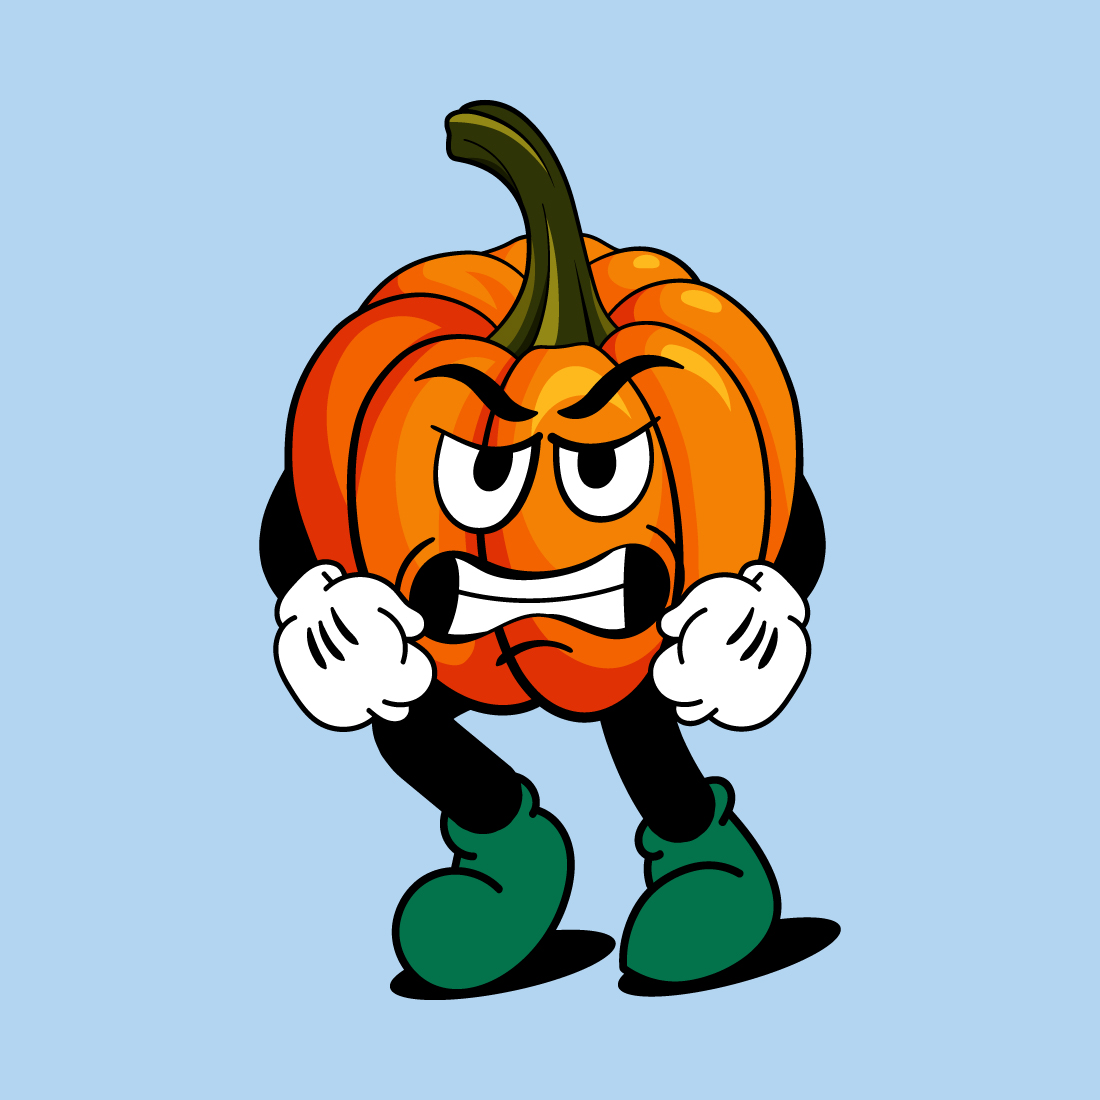 4 Cute Cartoon Pumpkin Characters for your best designs.